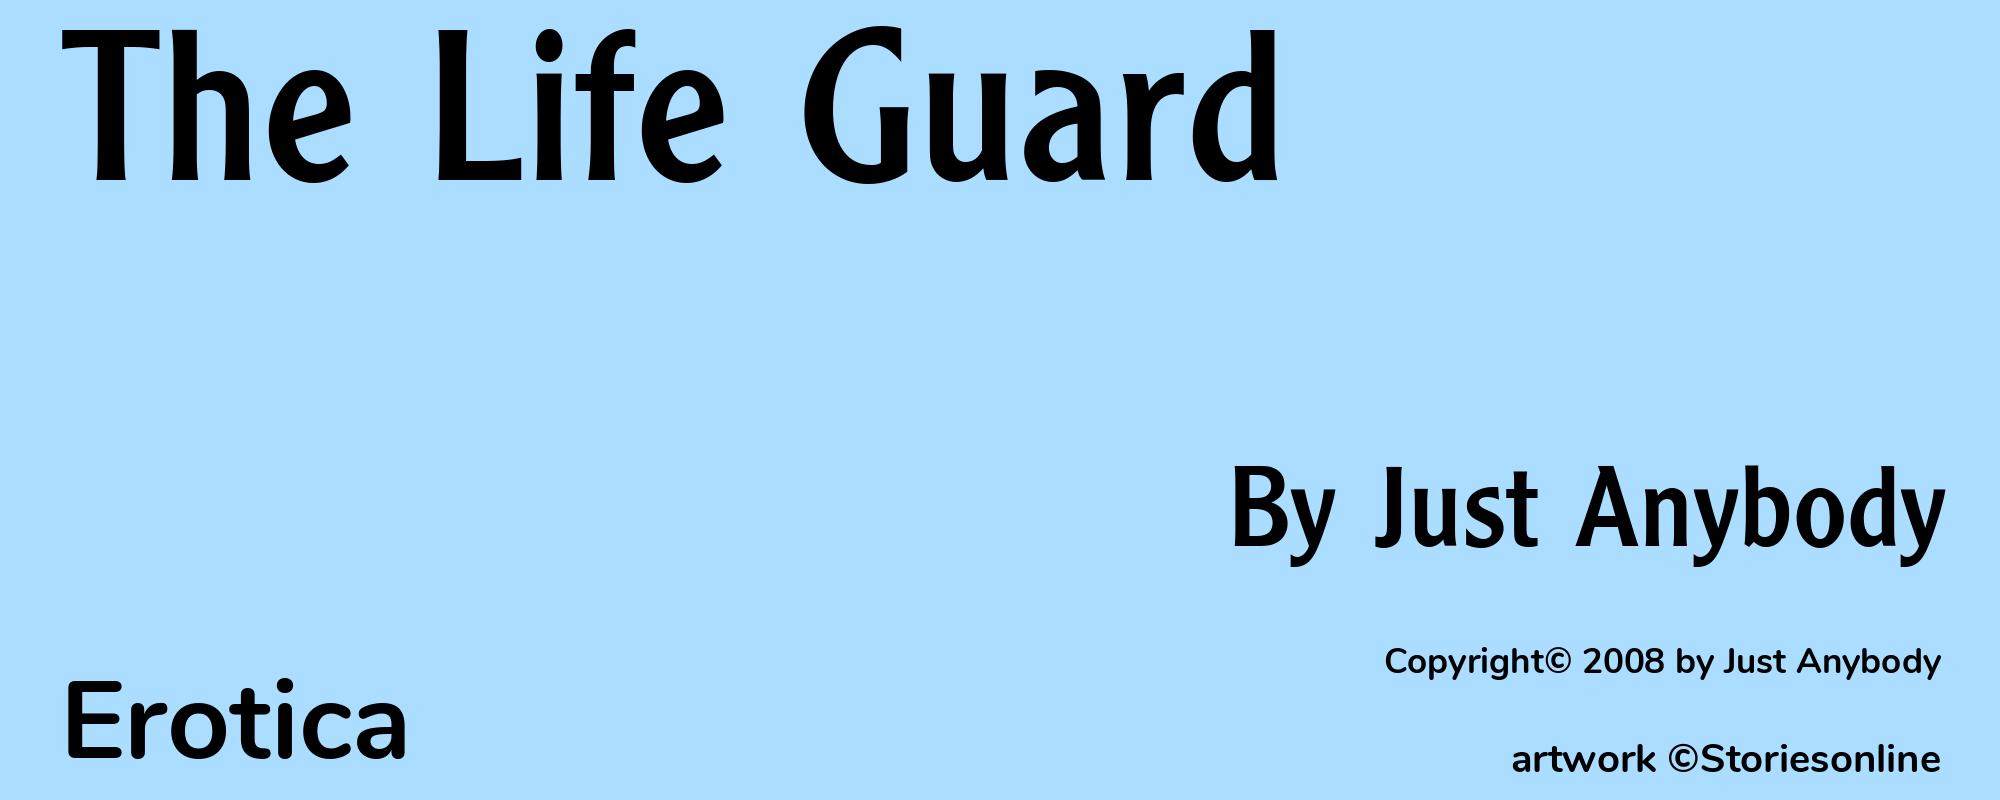 The Life Guard - Cover